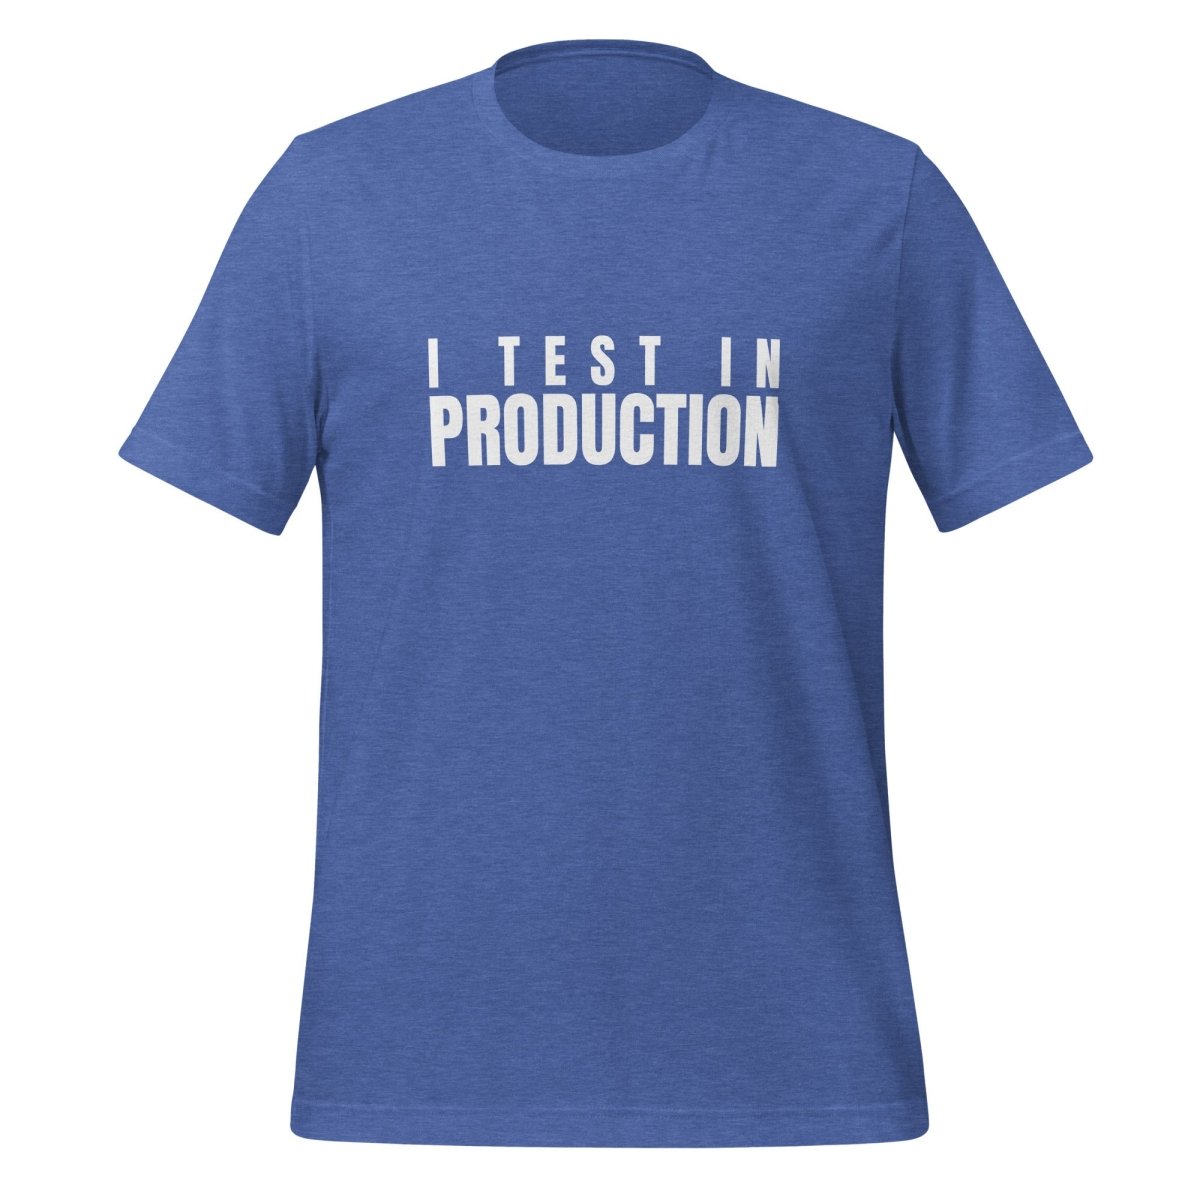 I Test in Production T - Shirt (unisex) - Heather True Royal - AI Store